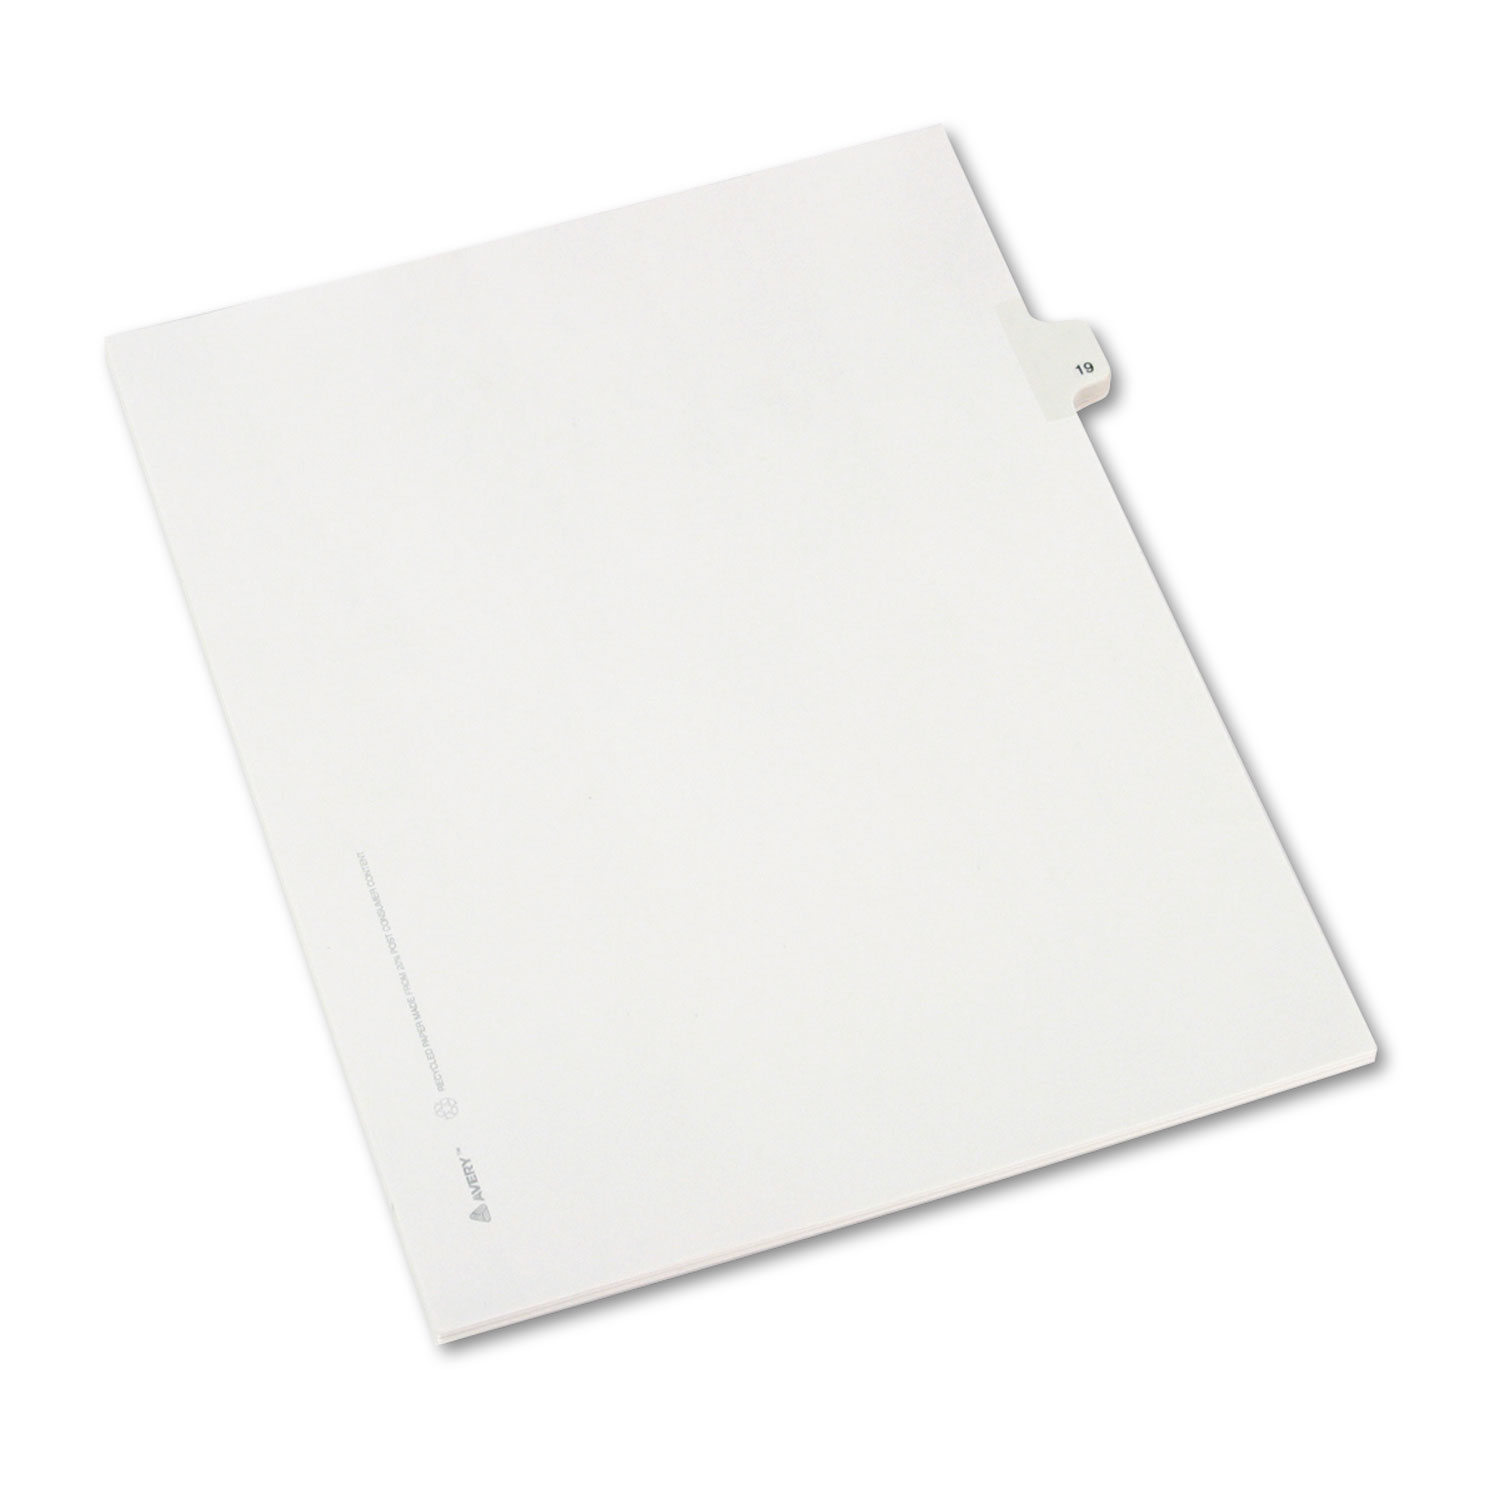  Avery 82217 Preprinted Legal Exhibit Side Tab Index Dividers, Allstate Style, 10-Tab, 19, 11 x 8.5, White, 25/Pack (AVE82217) 